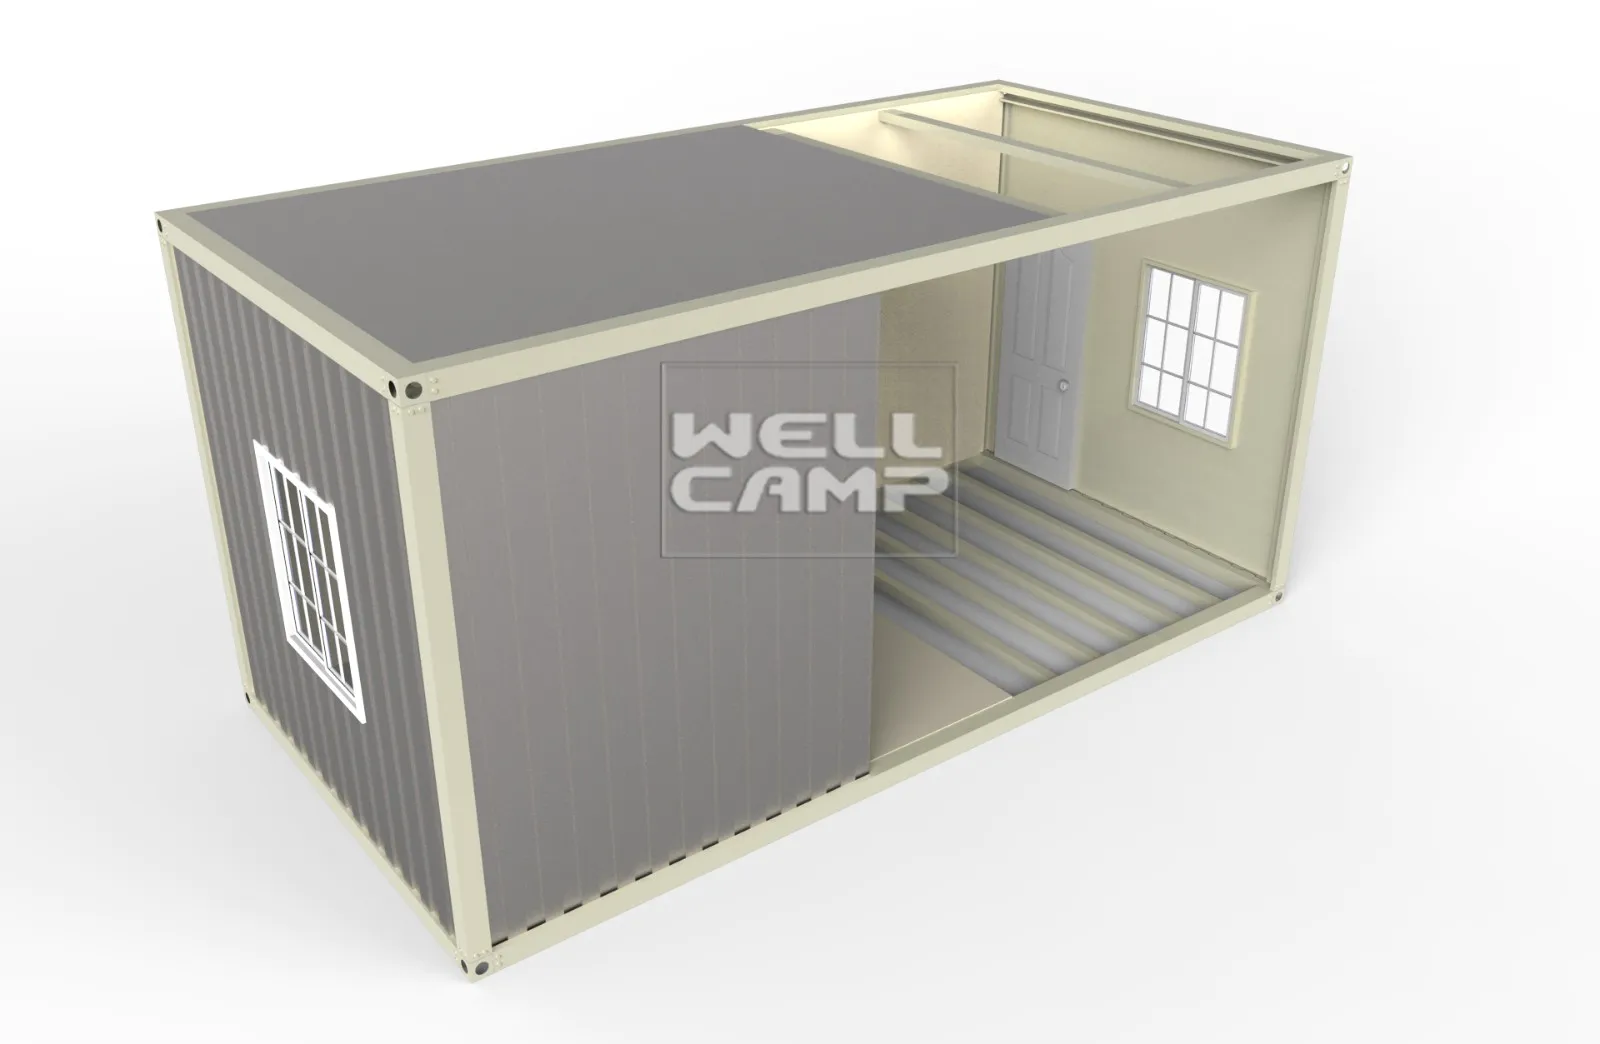 fast install container shelter with two bedroom for wedding room